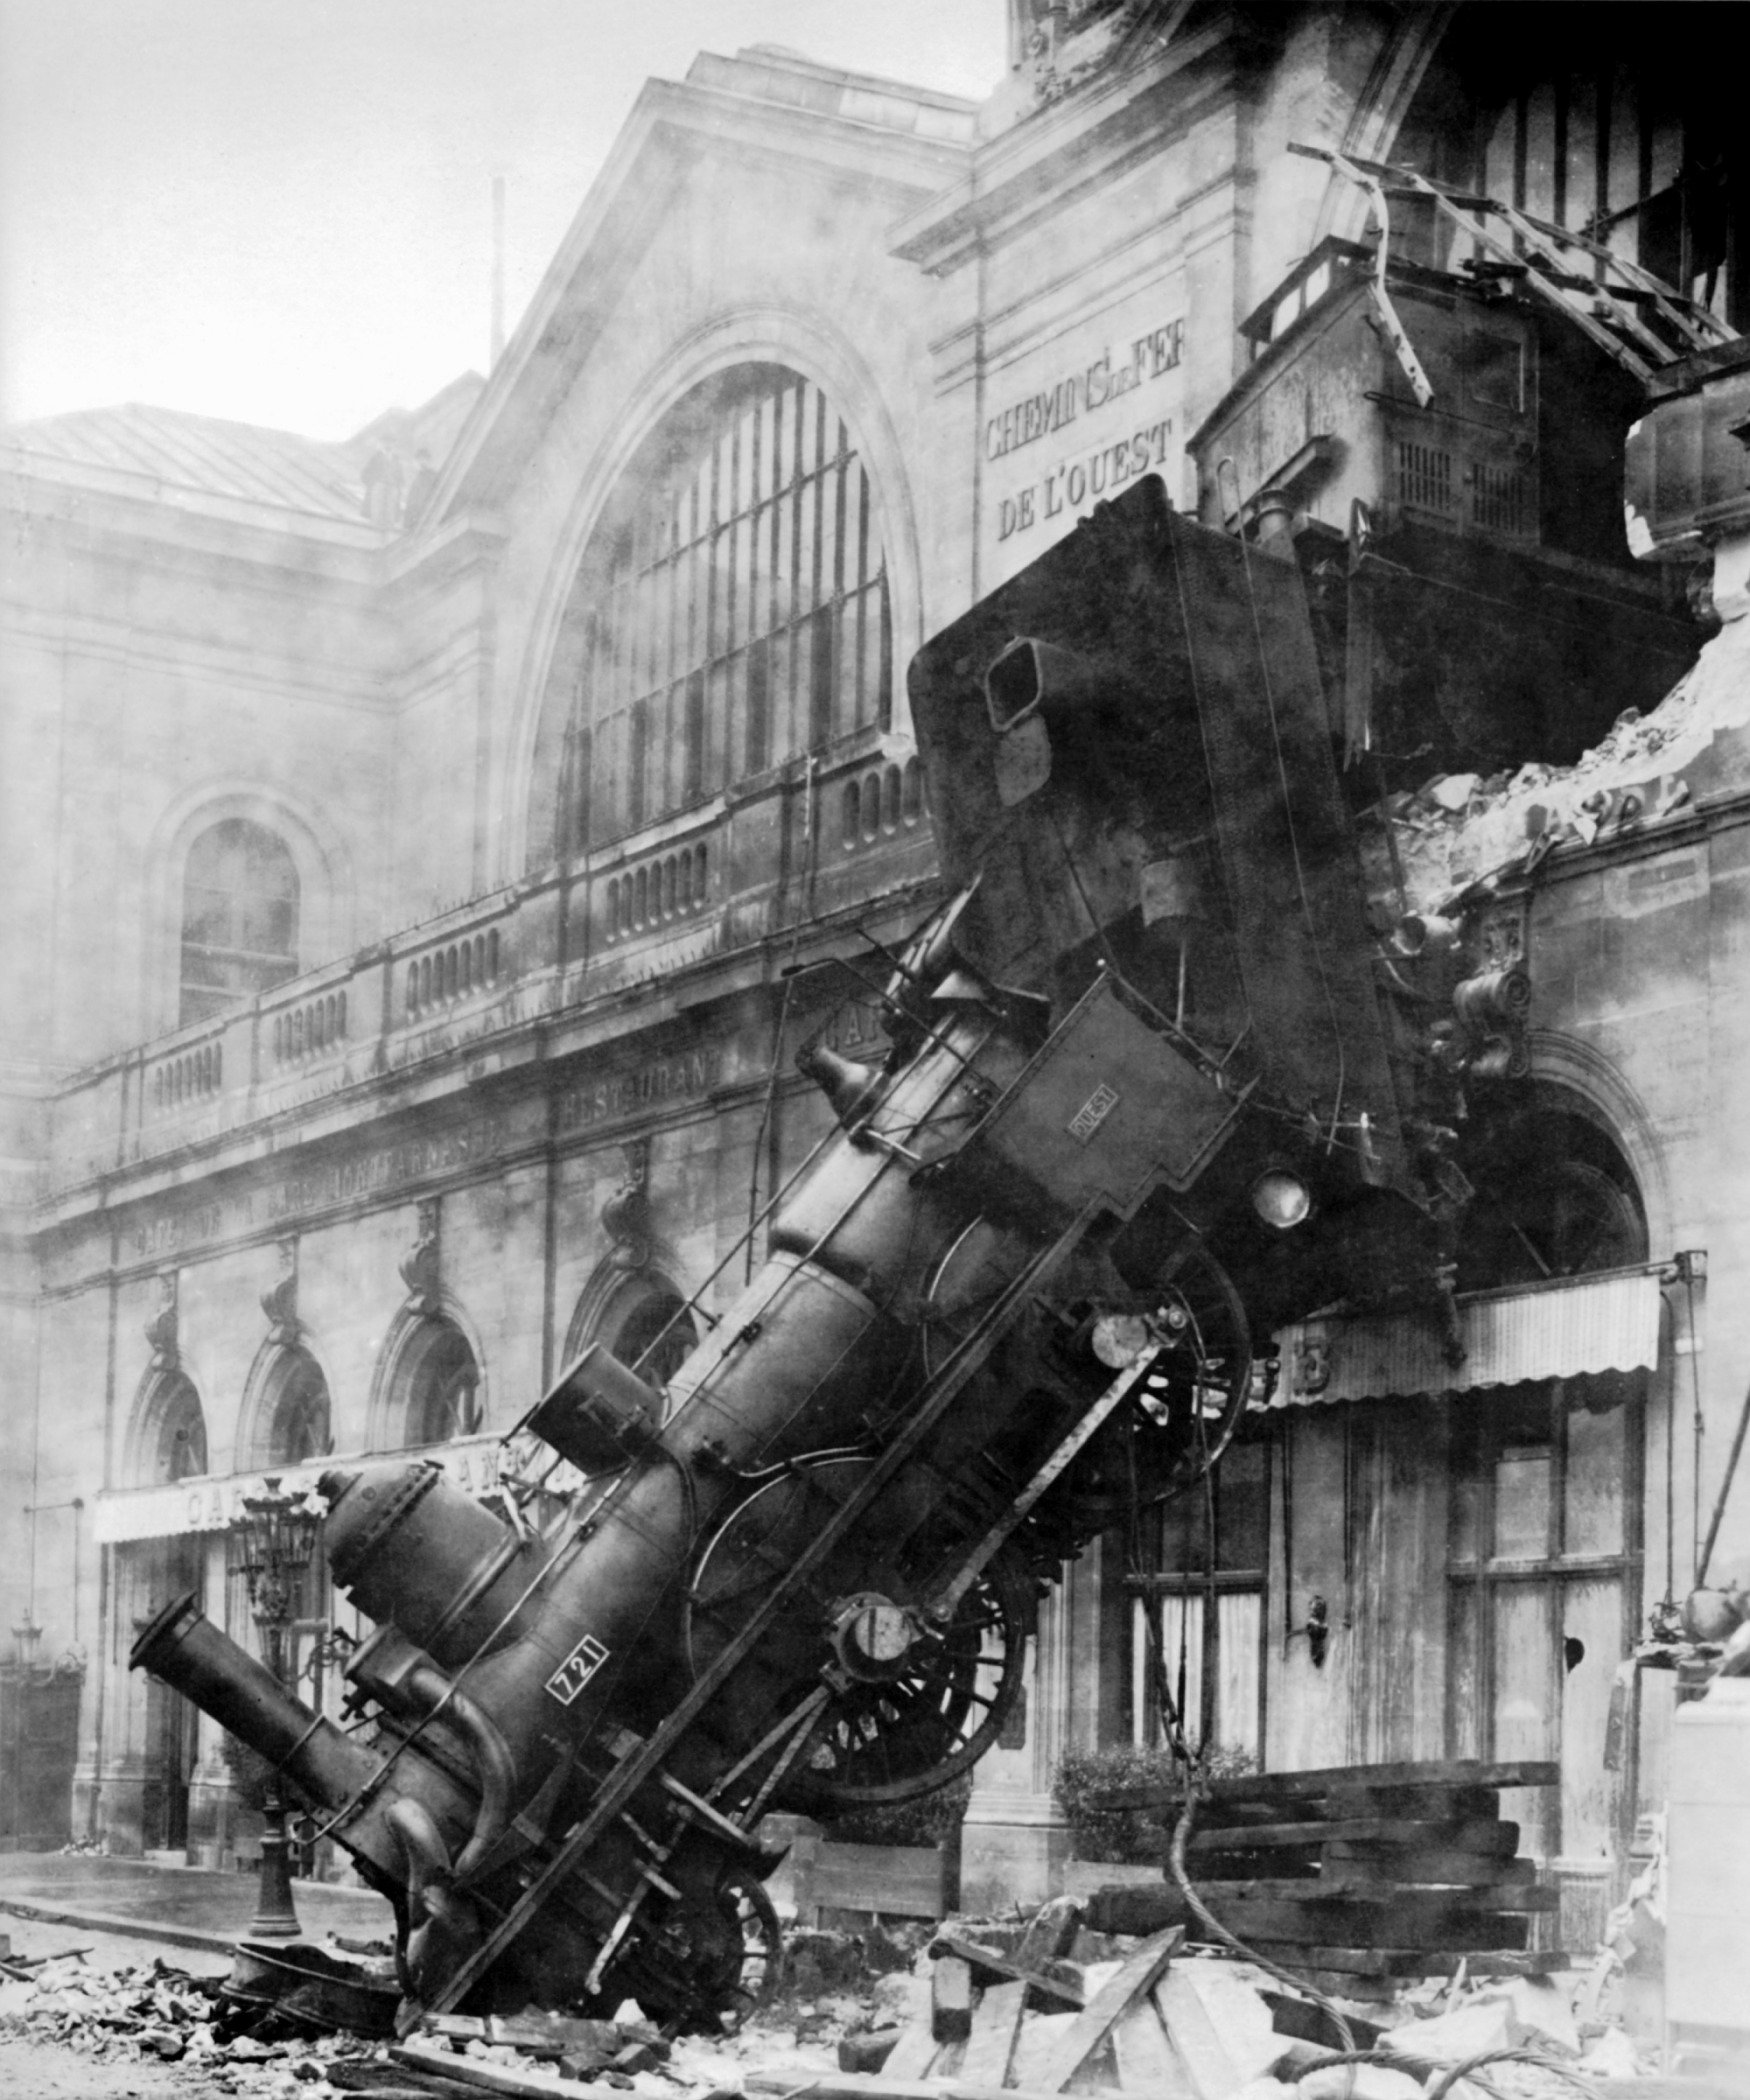 Photo of a train engine that has crashed comletely through the wall of a train station.